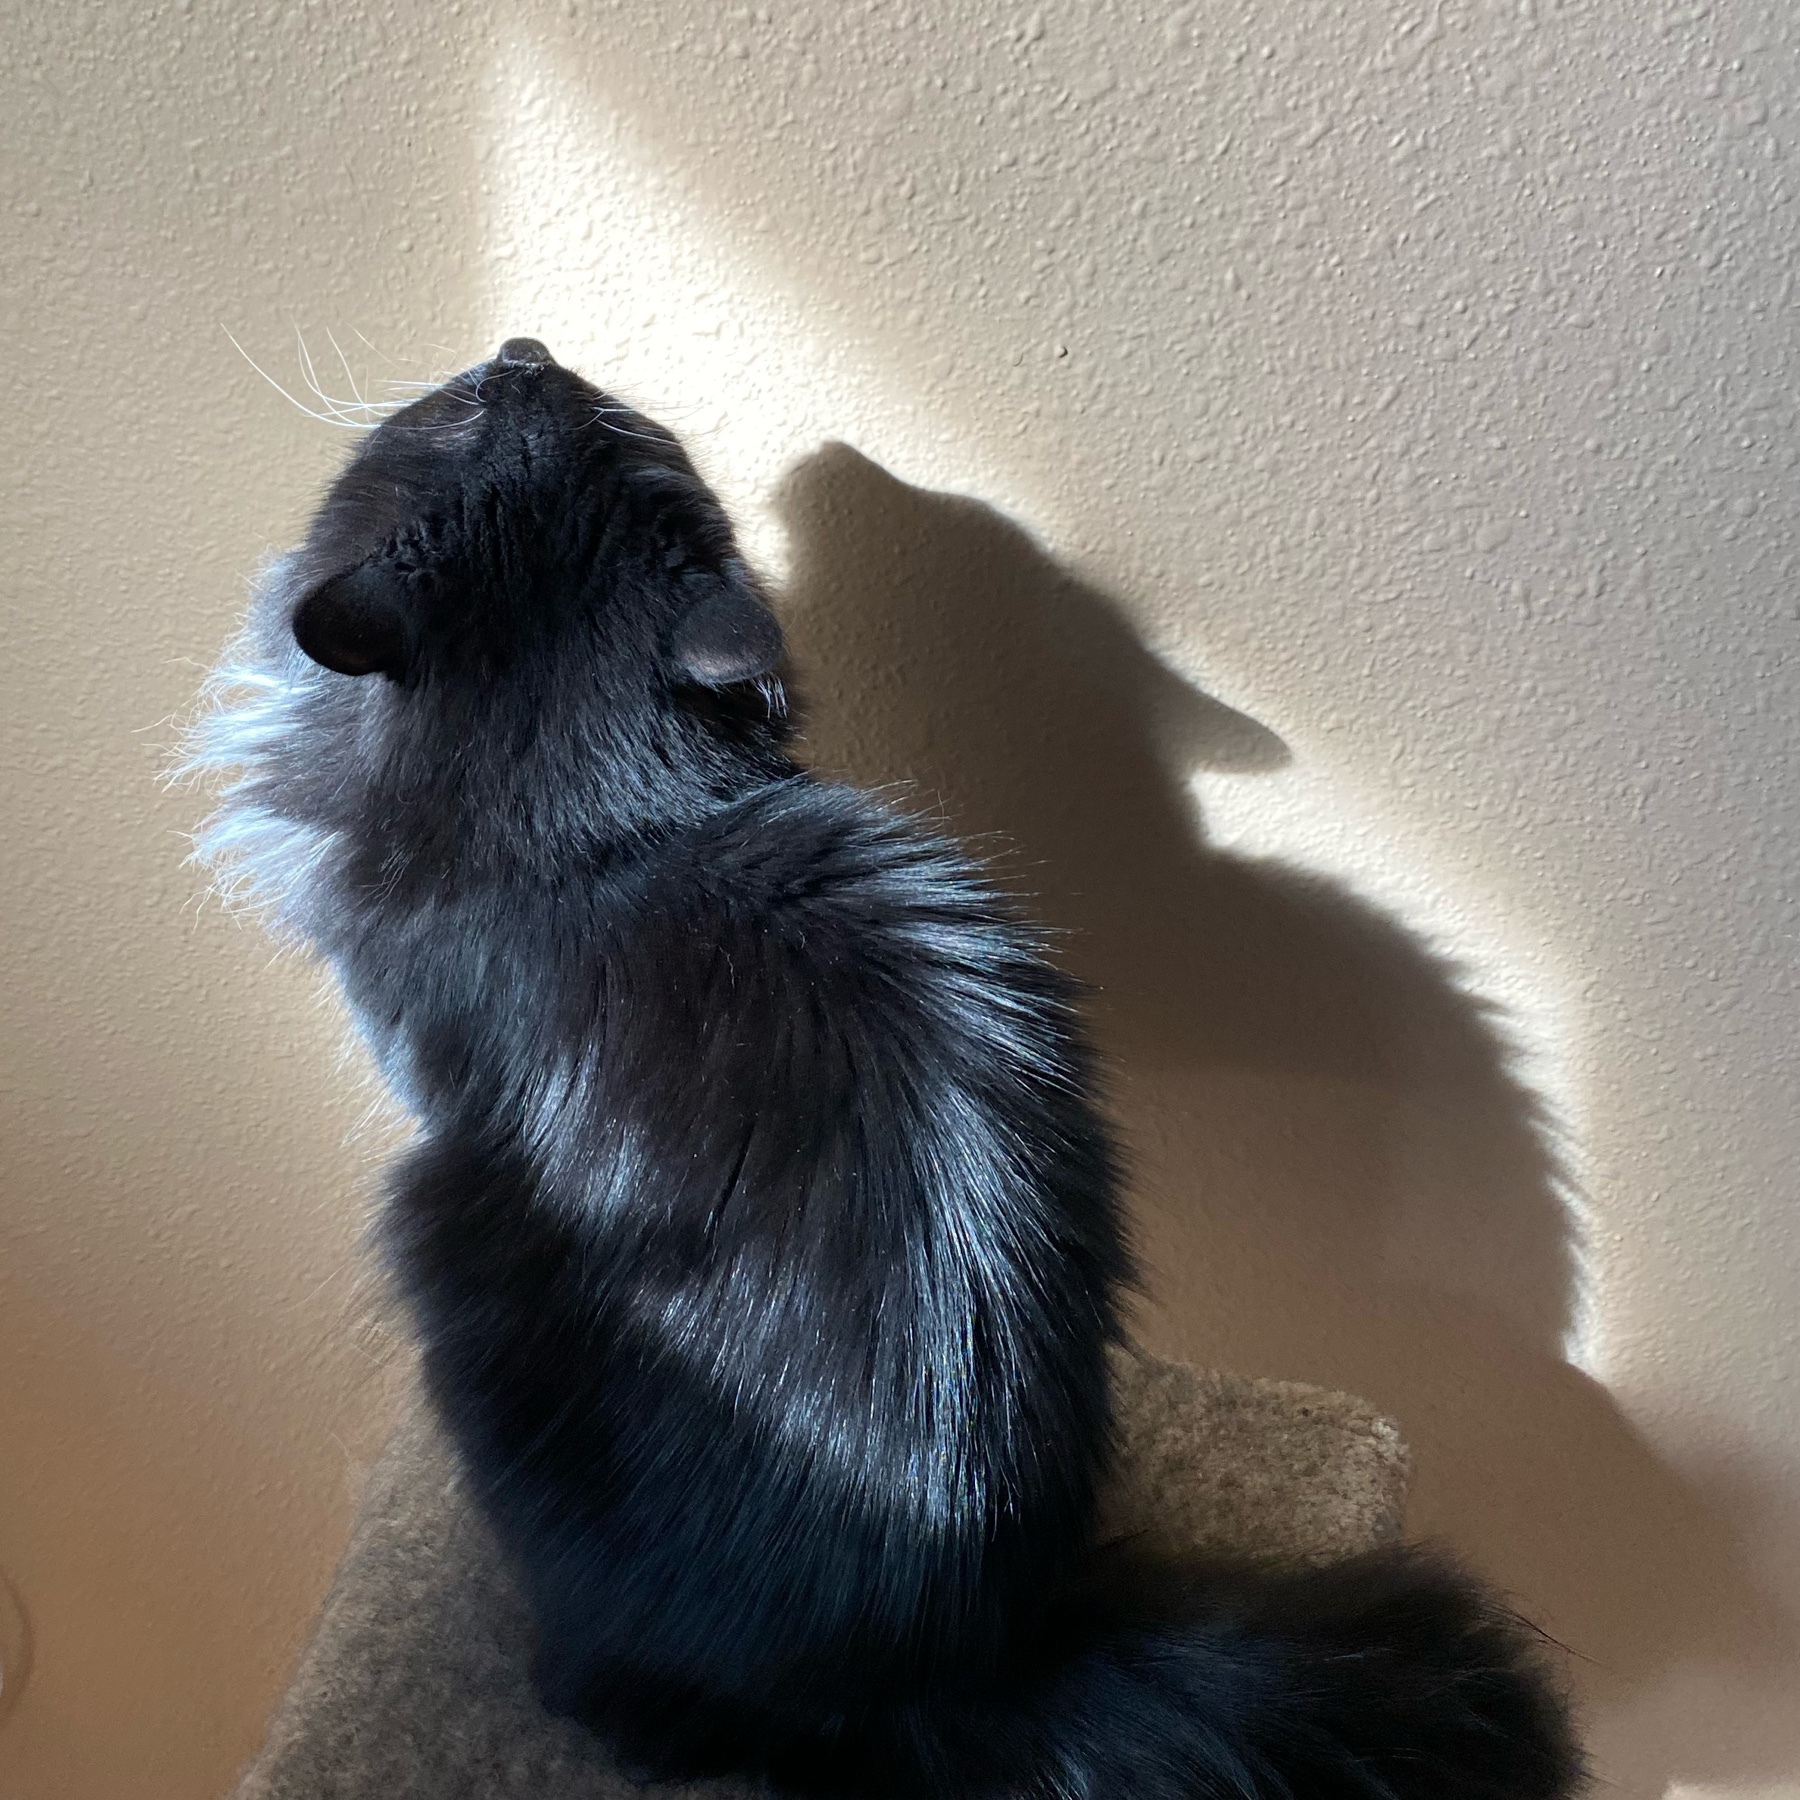 black and white cat on a perch taking in a sun beam